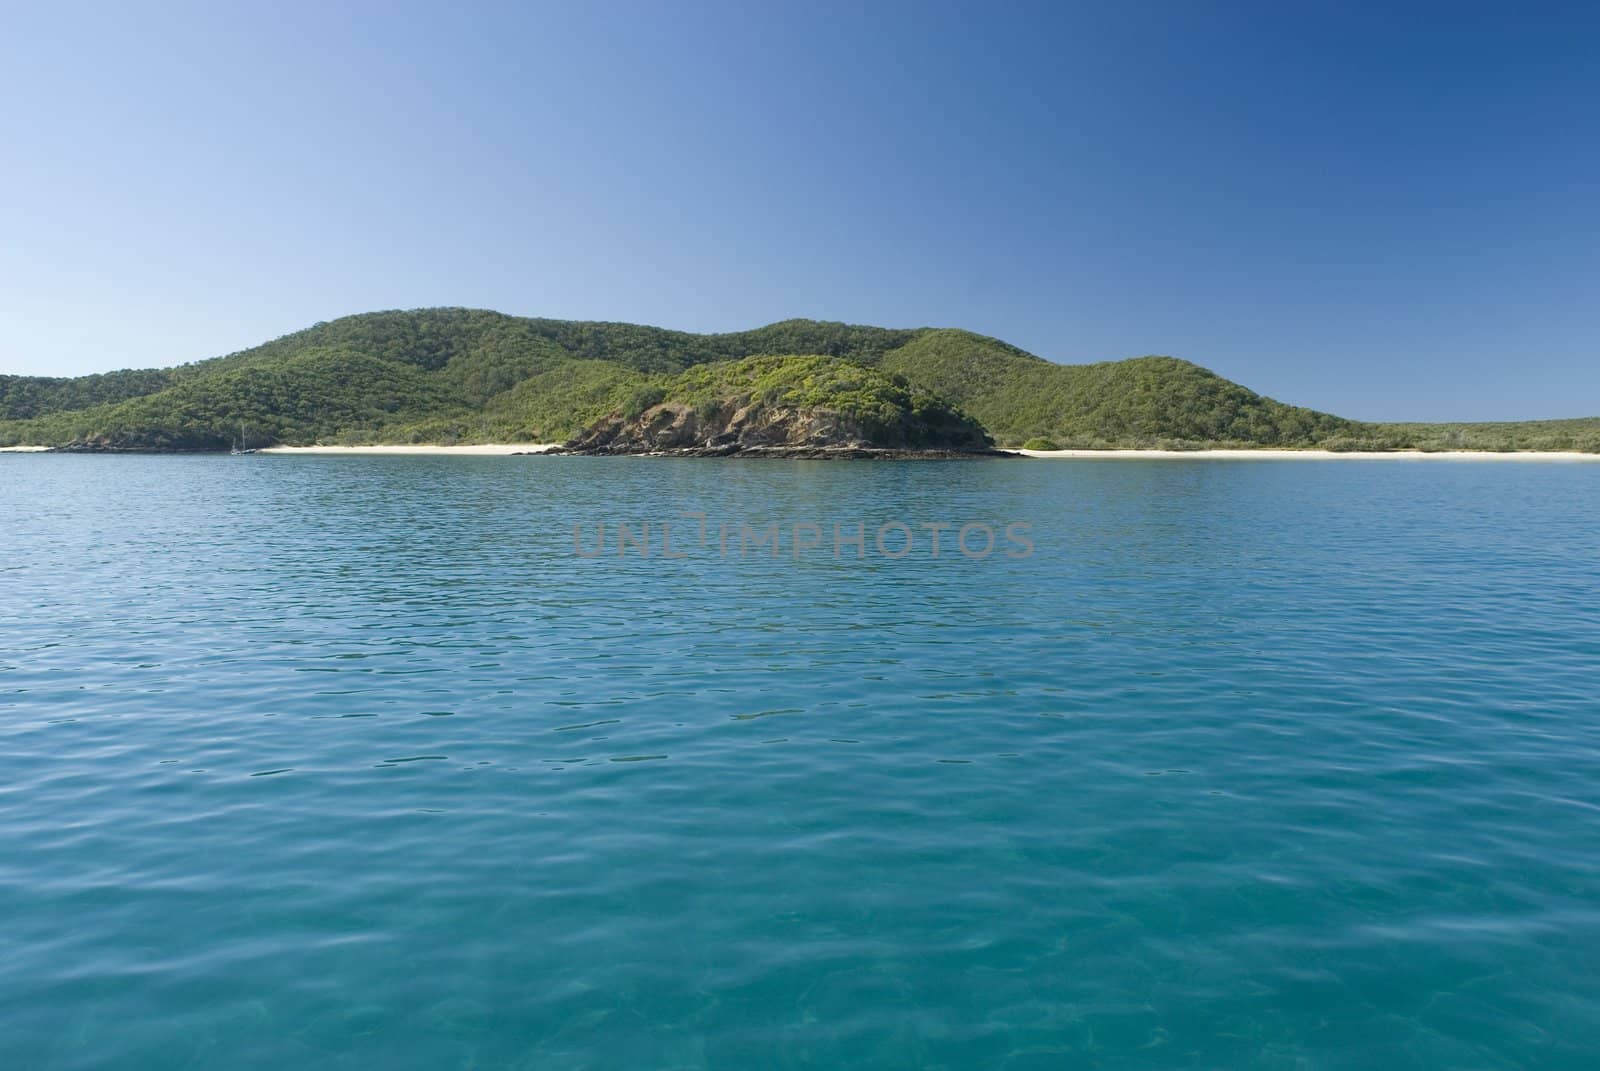 A lone yacht moored off great keppel island, queensland, australia